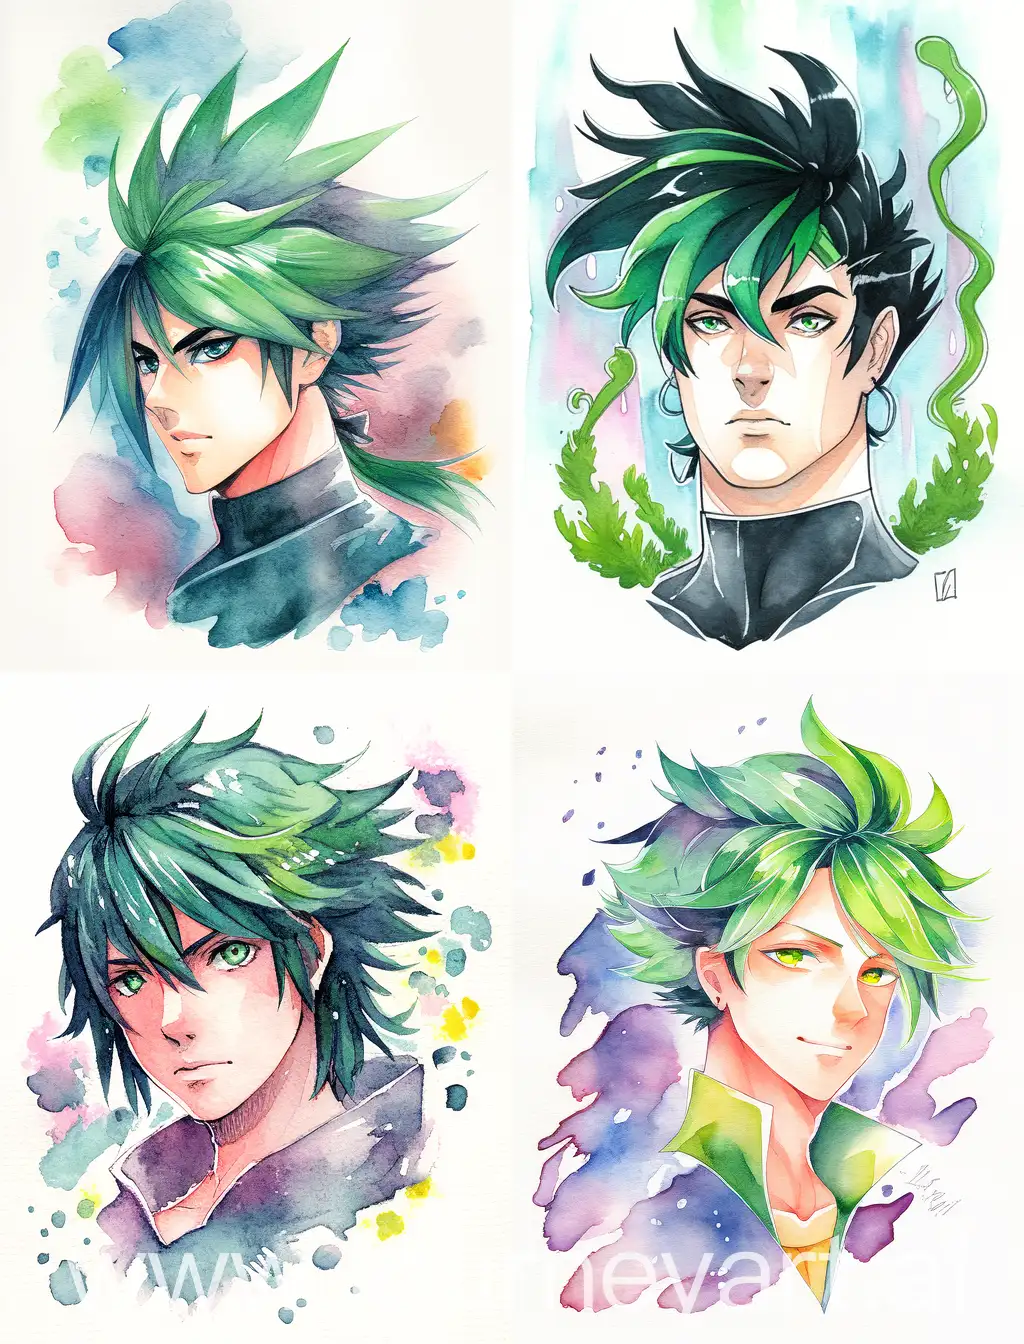 Colorful-Watercolor-Portrait-of-a-Man-from-Uranus-with-Black-and-Green-Hair